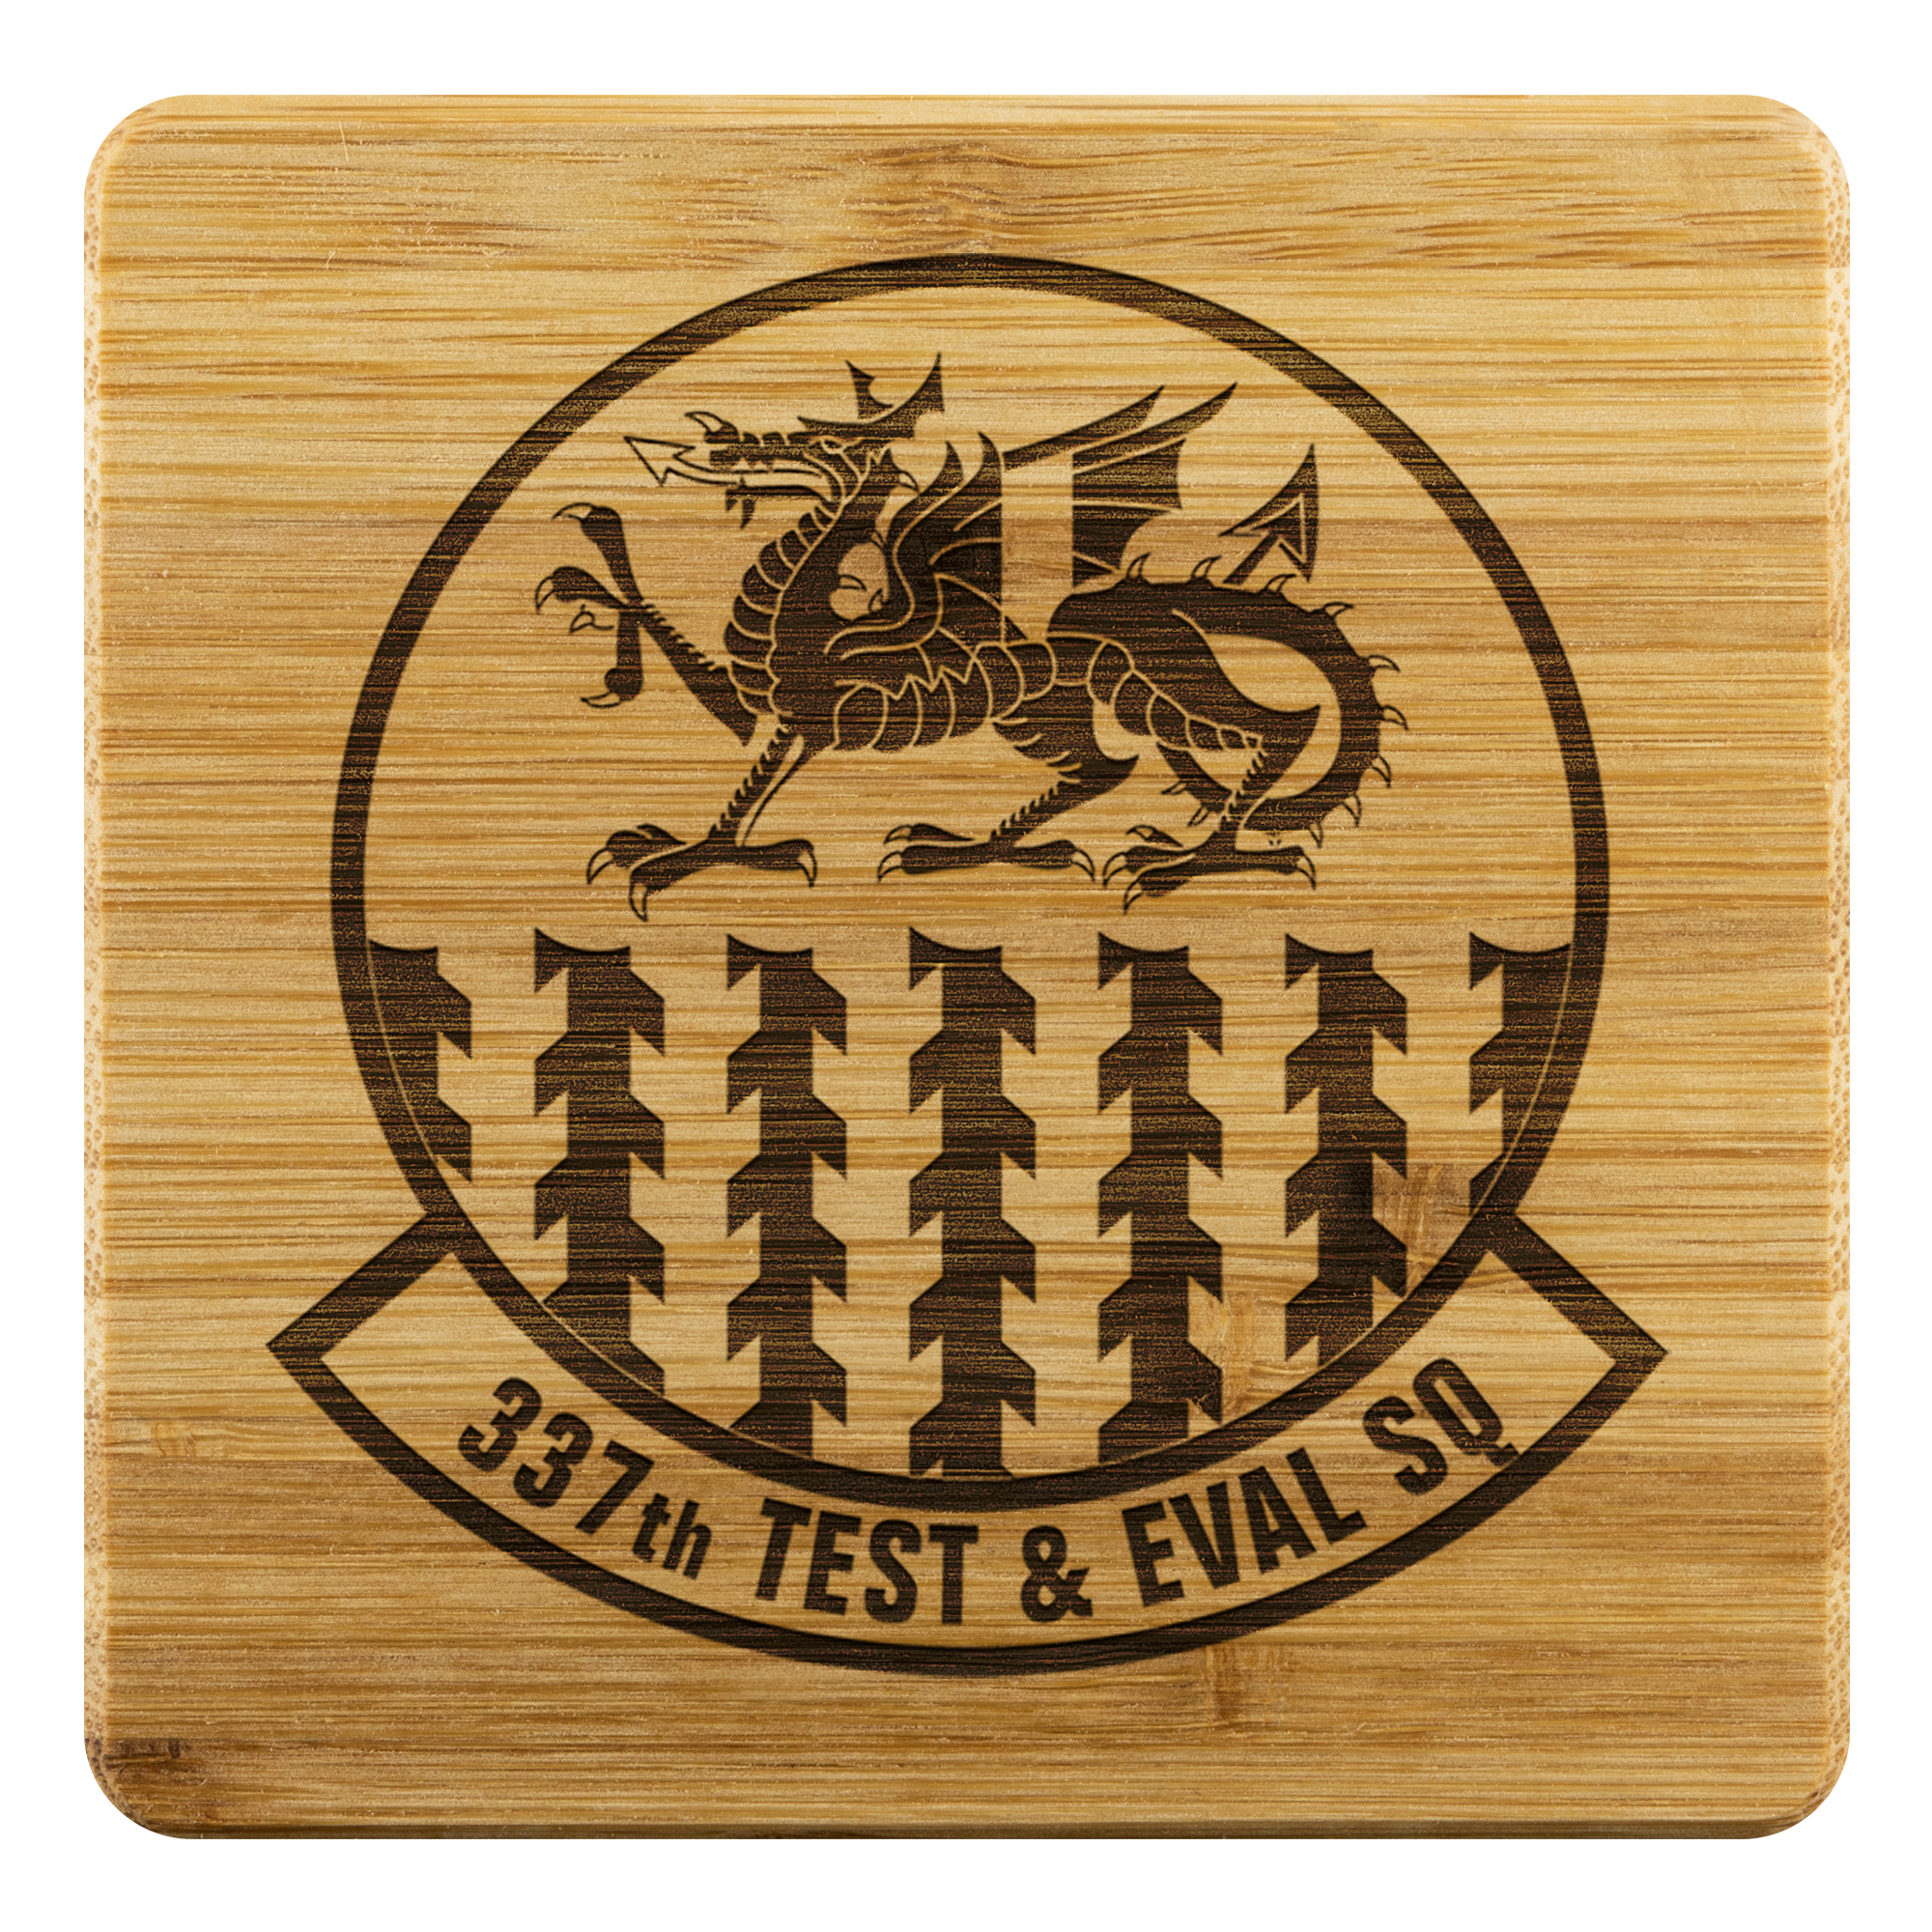 337th Test and Evaluation Squadron - BAMBOO COASTERS (SET OF 4)